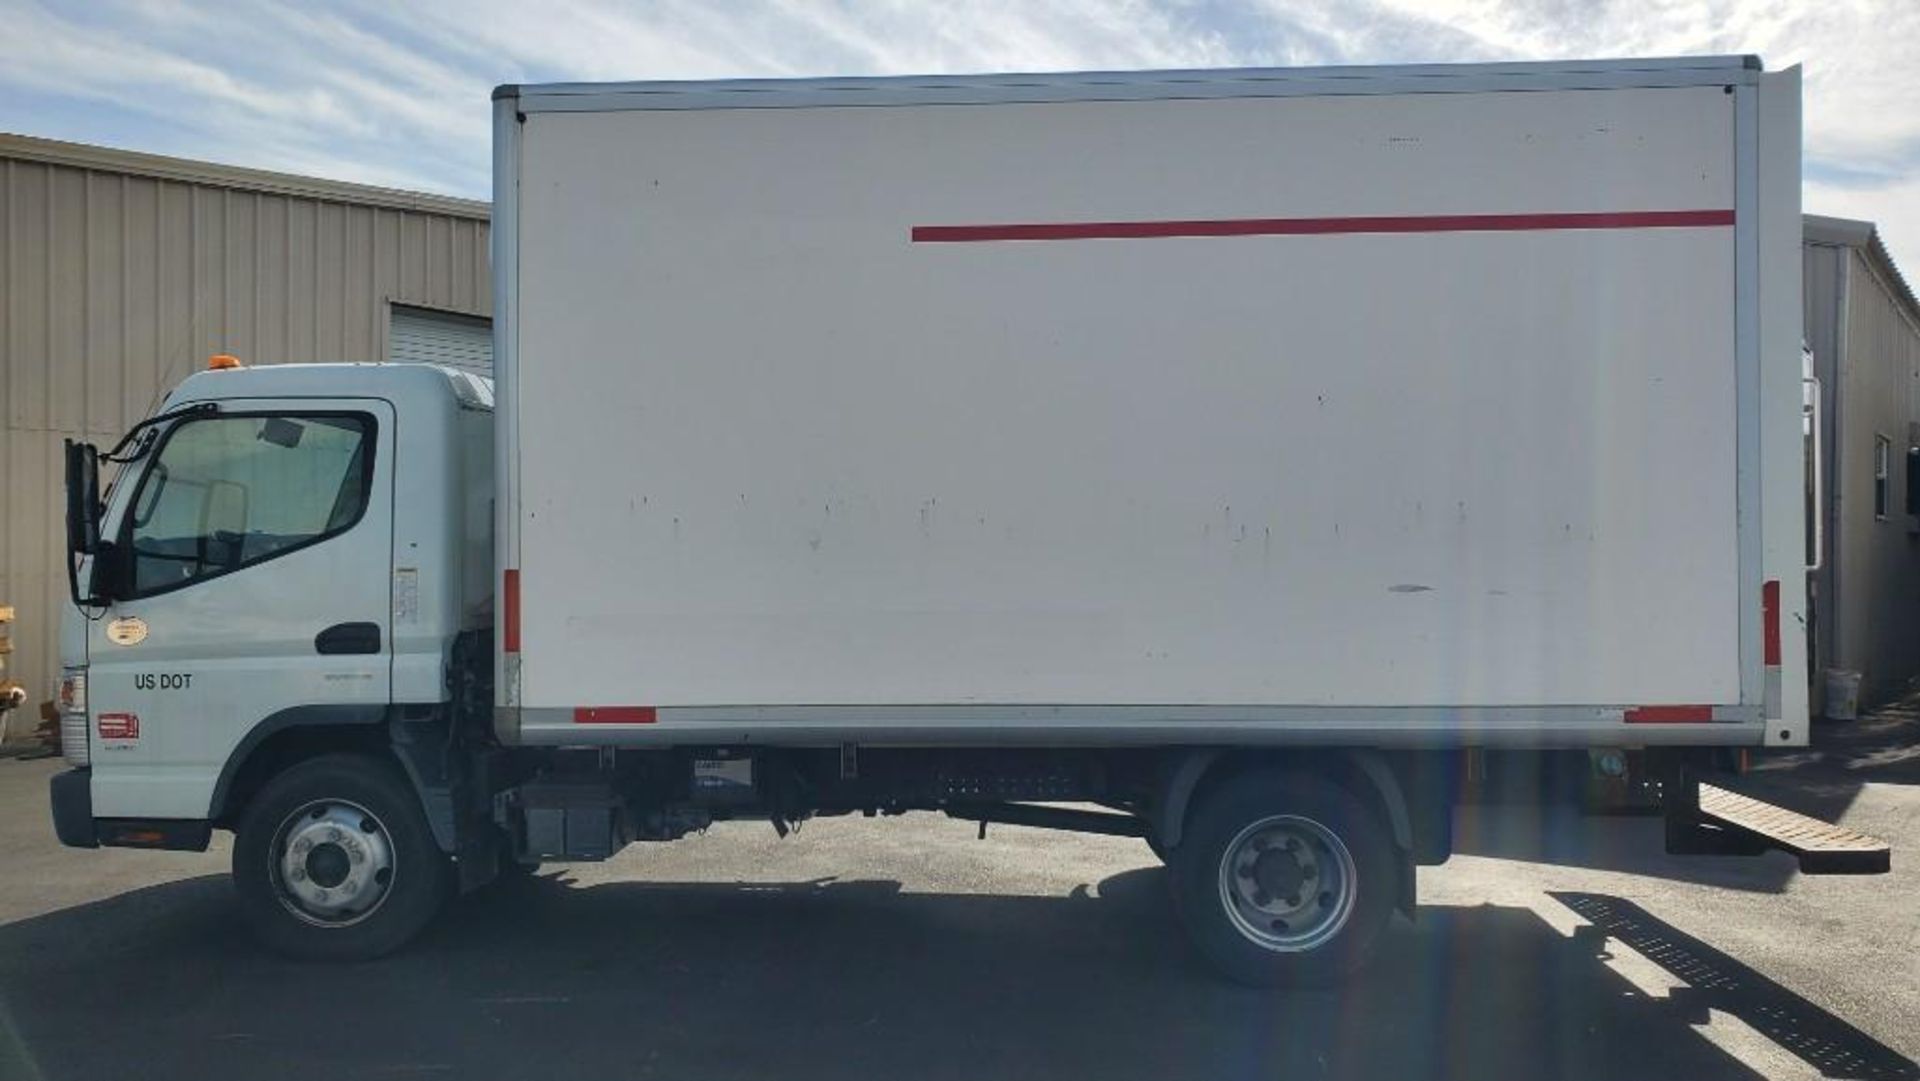 2015 MITSUBISHI FUSO FE180 BOX TRUCK APPROX 14' BOX, DIESEL ENGINE, AUTOMATIC TRANSMISSION - Image 7 of 39